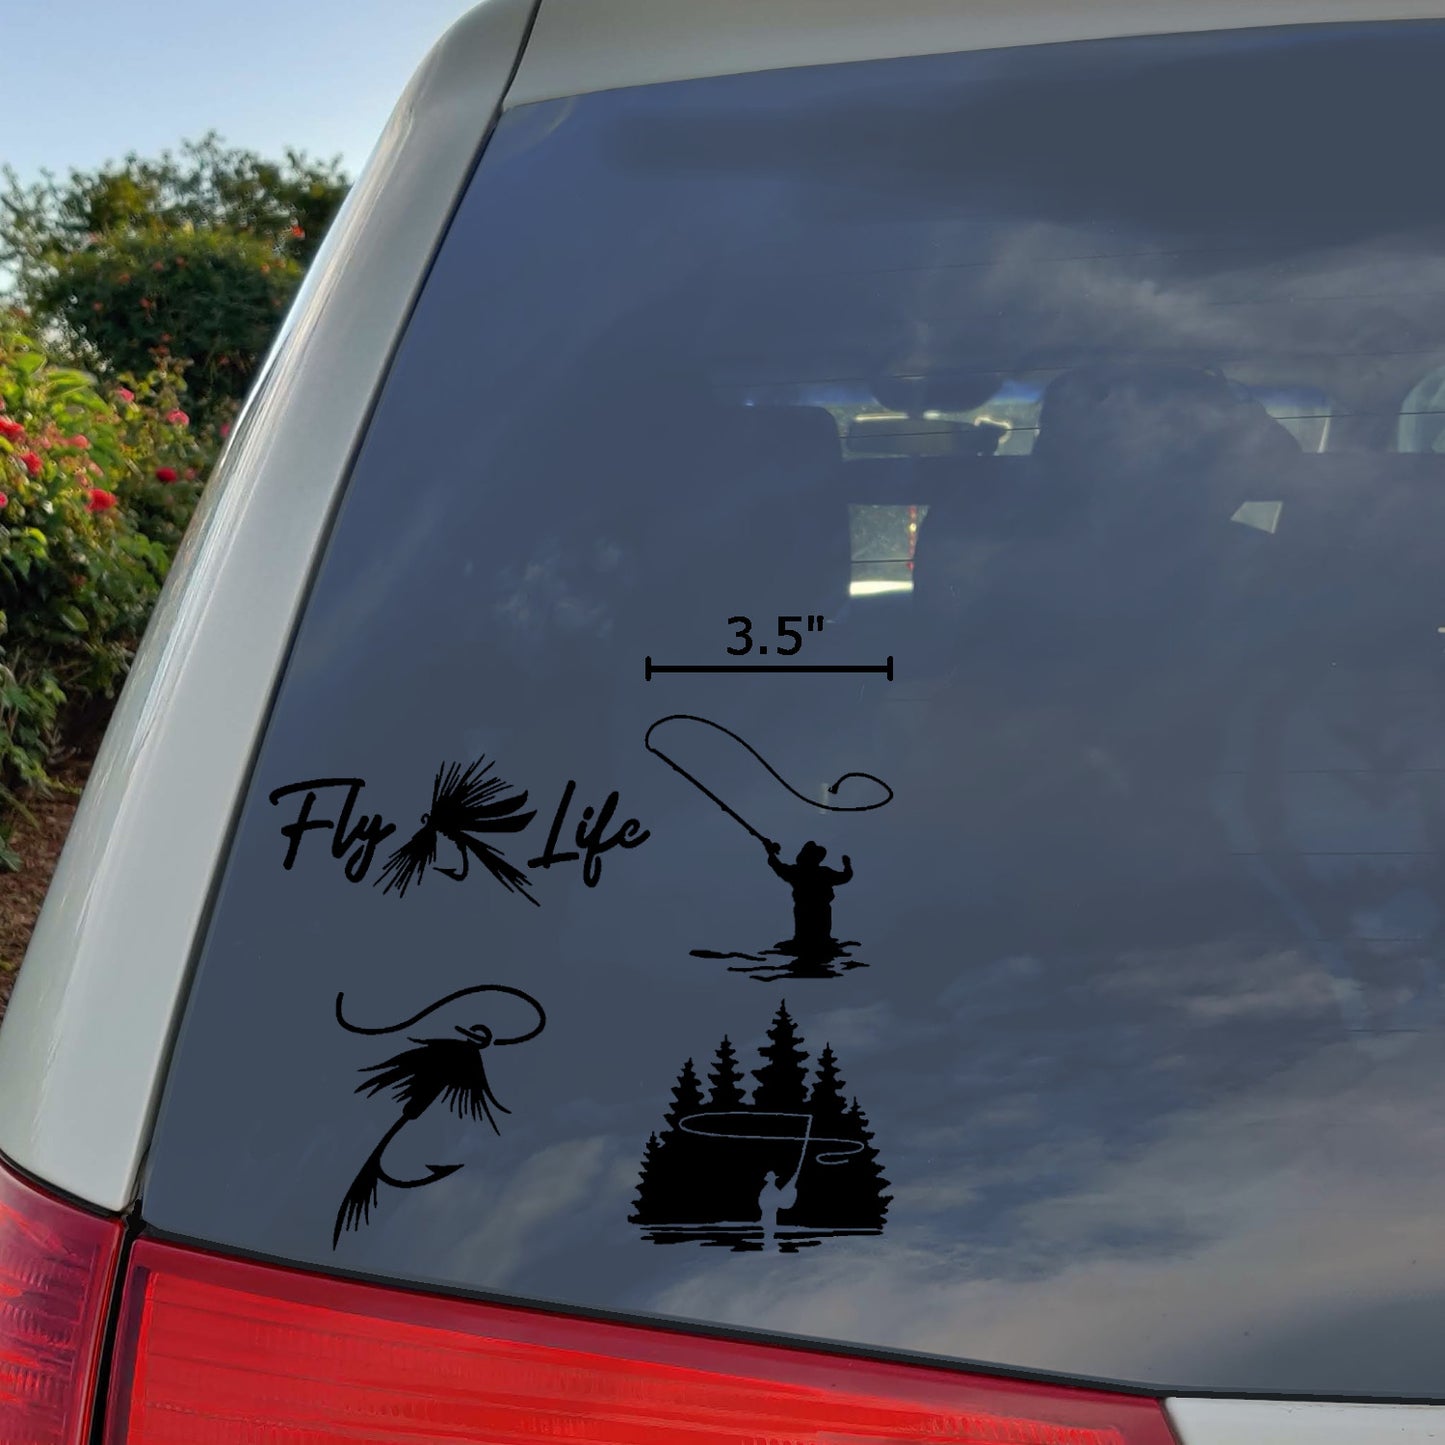 Fly Fishing Decals 4 Pack